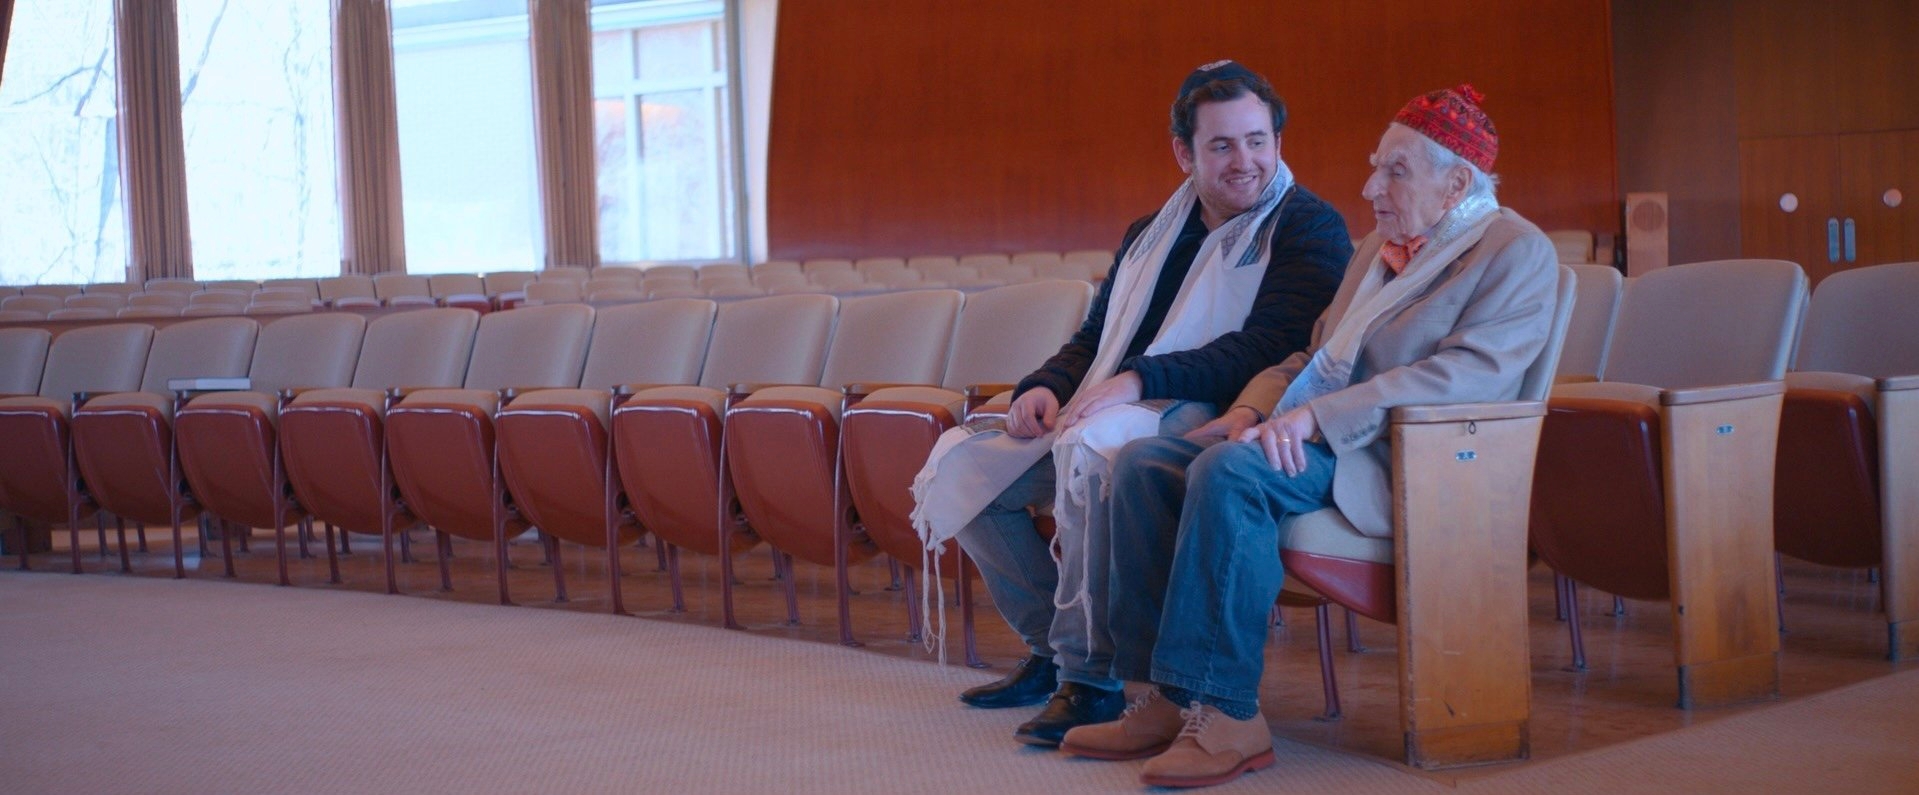 Dr. Howard Tucker and his grandson Austin Tucker, who is making a documentary about his grandfather, talk in synagogue together. (Courtesy “What’s Next?” movie)